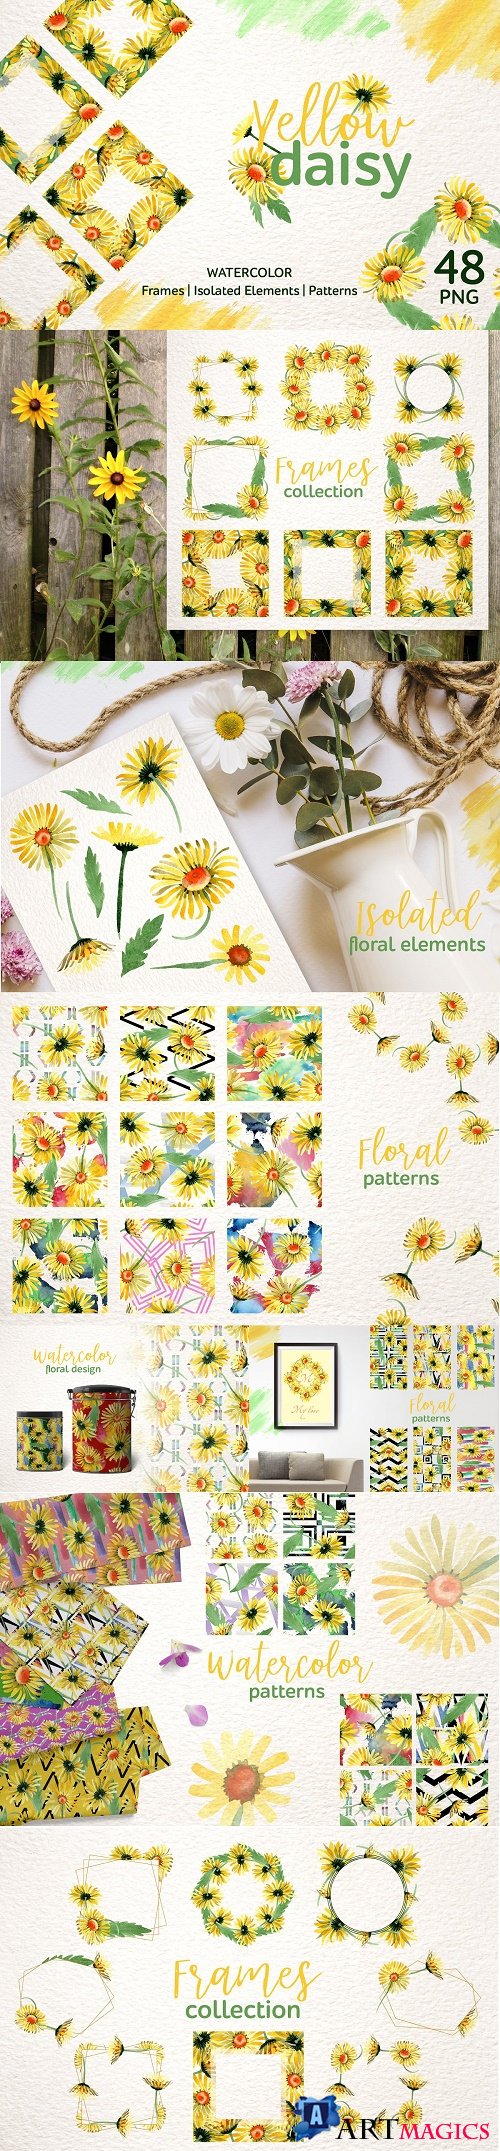 Yellow daisy Watercolor png - 3629201